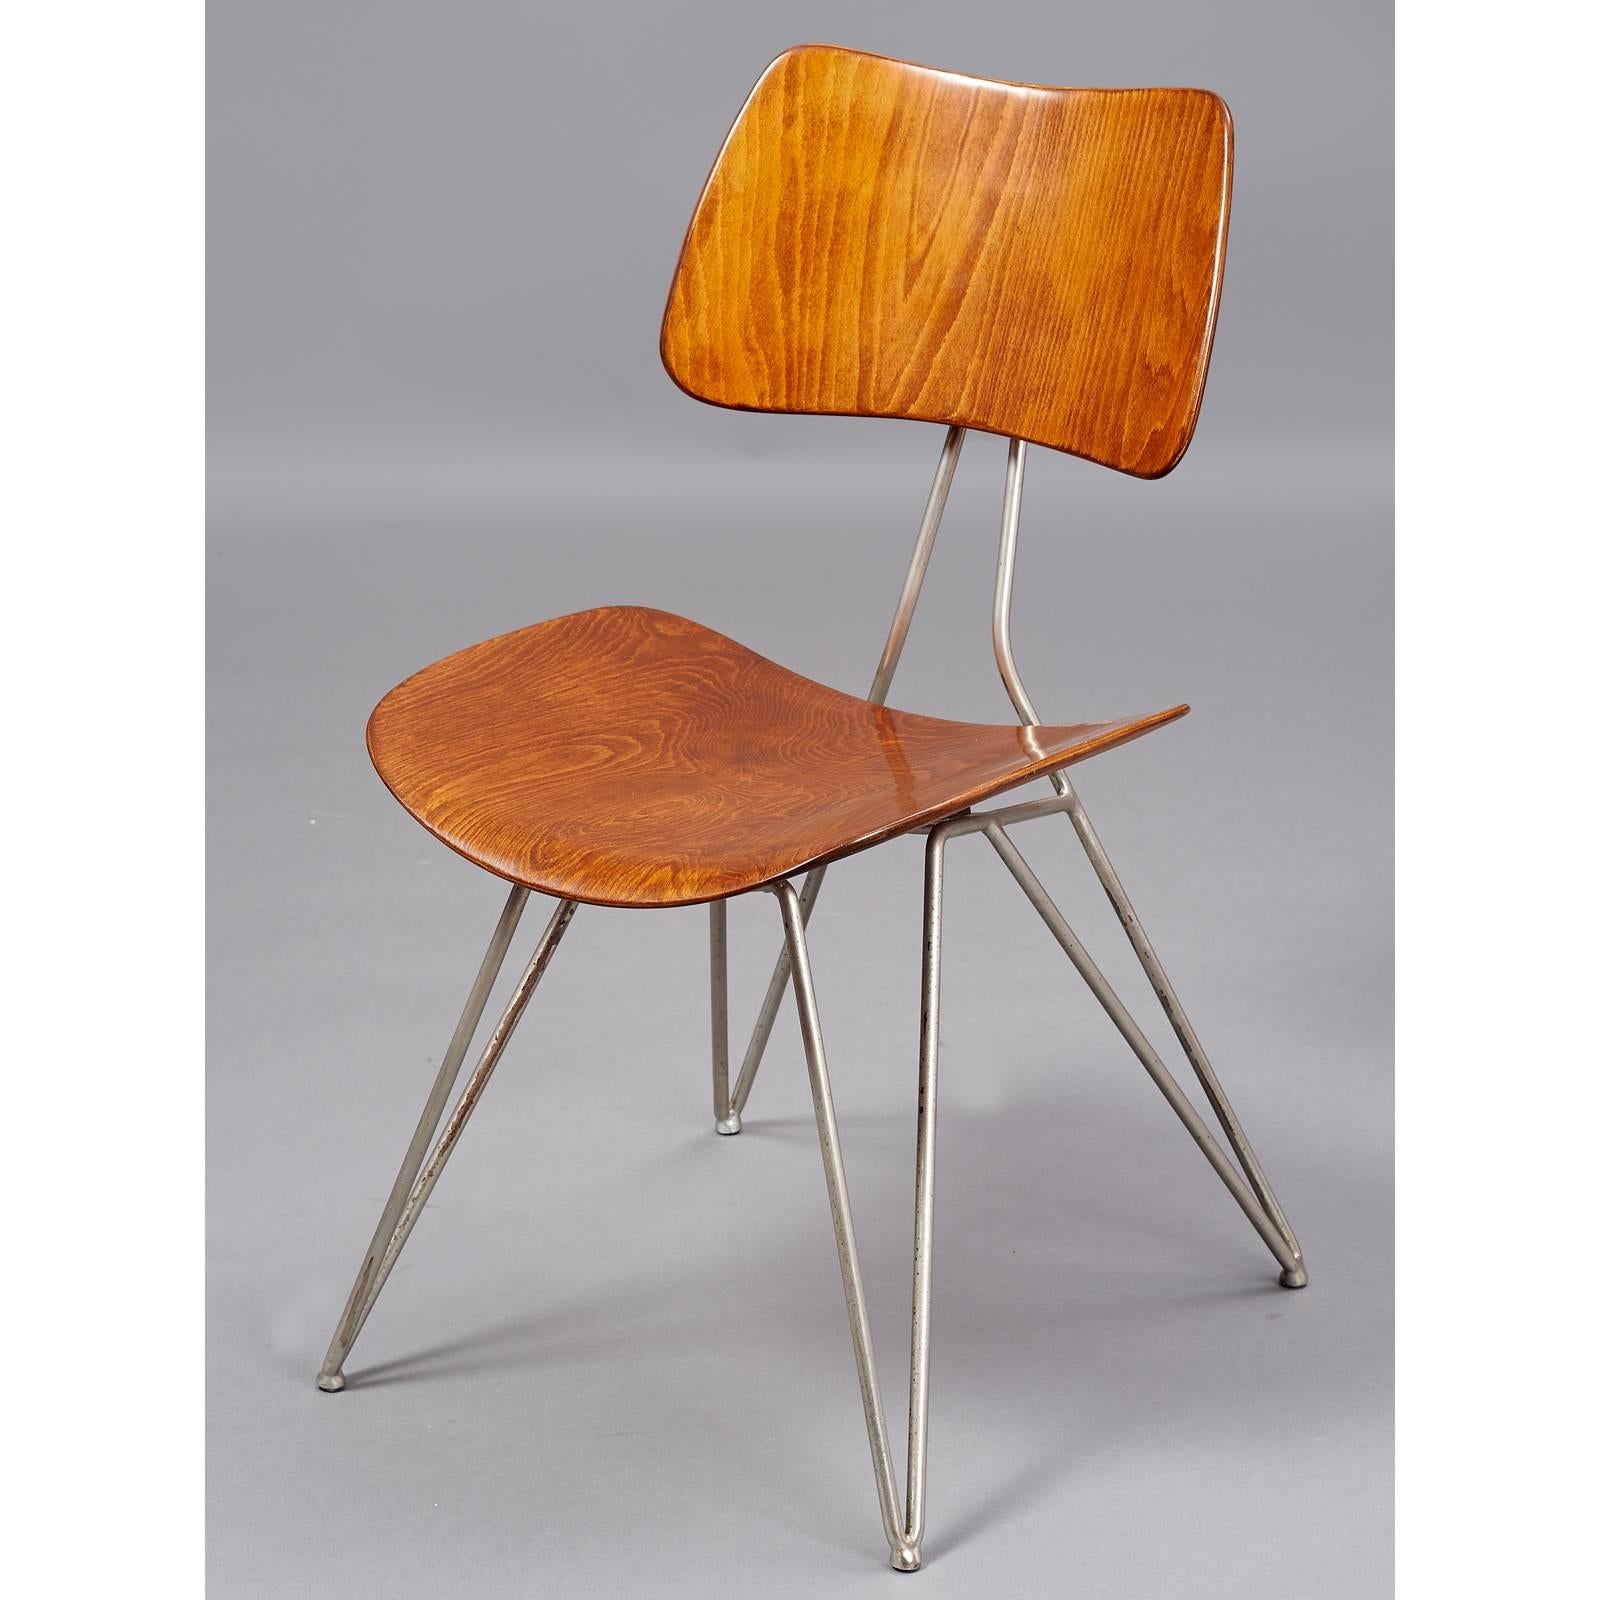 Gastone Rinaldi with Gio Ponti
Sculptural modernist chair, Model Du 10 for Rima
Bent plywood, chromed steel
Italy, circa 1951
Measures: 18 W x 23 D x 17/32 H.